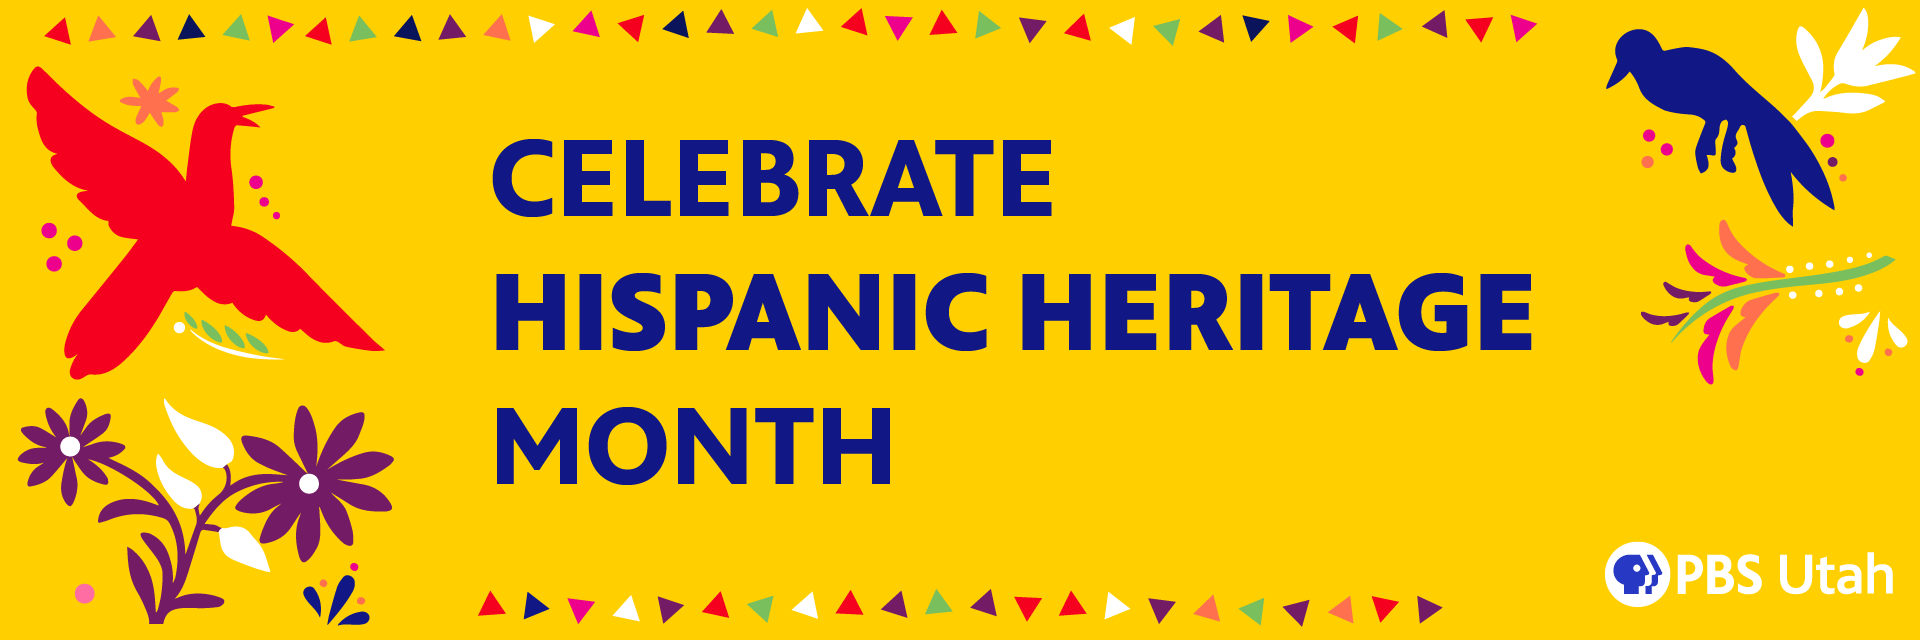 Vibrant color image with red, purple, blue and yellow for Hispanic Heritage Month from PBS, a featured collection of videos about suicide awareness and mental health.